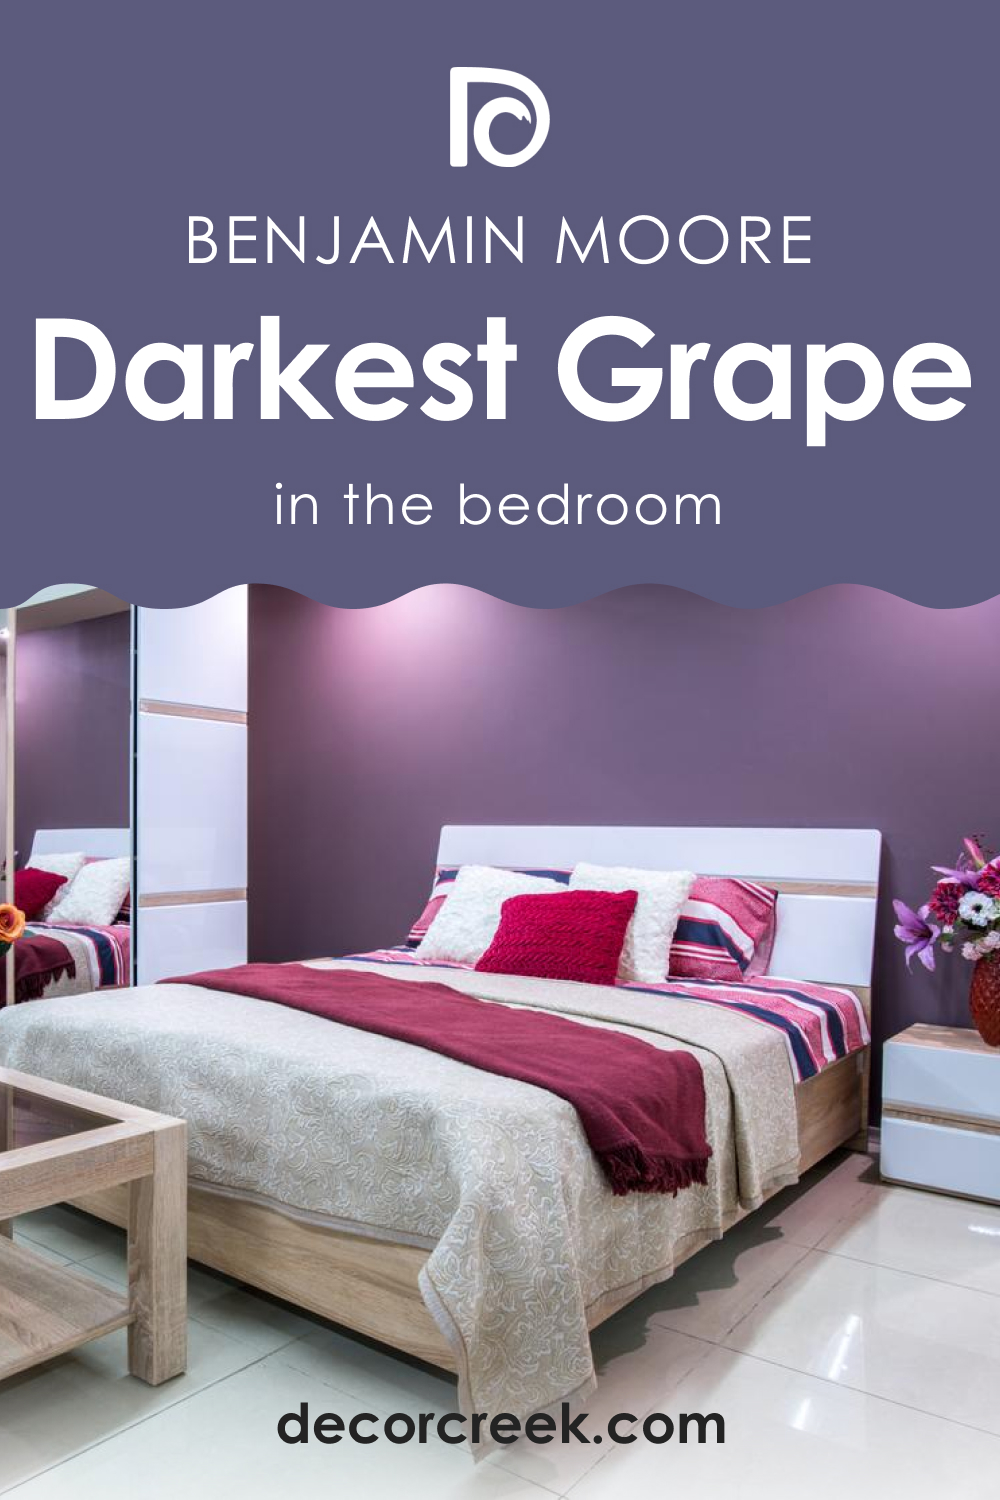 How to Use Darkest Grape 2069-30 in the Bedroom?